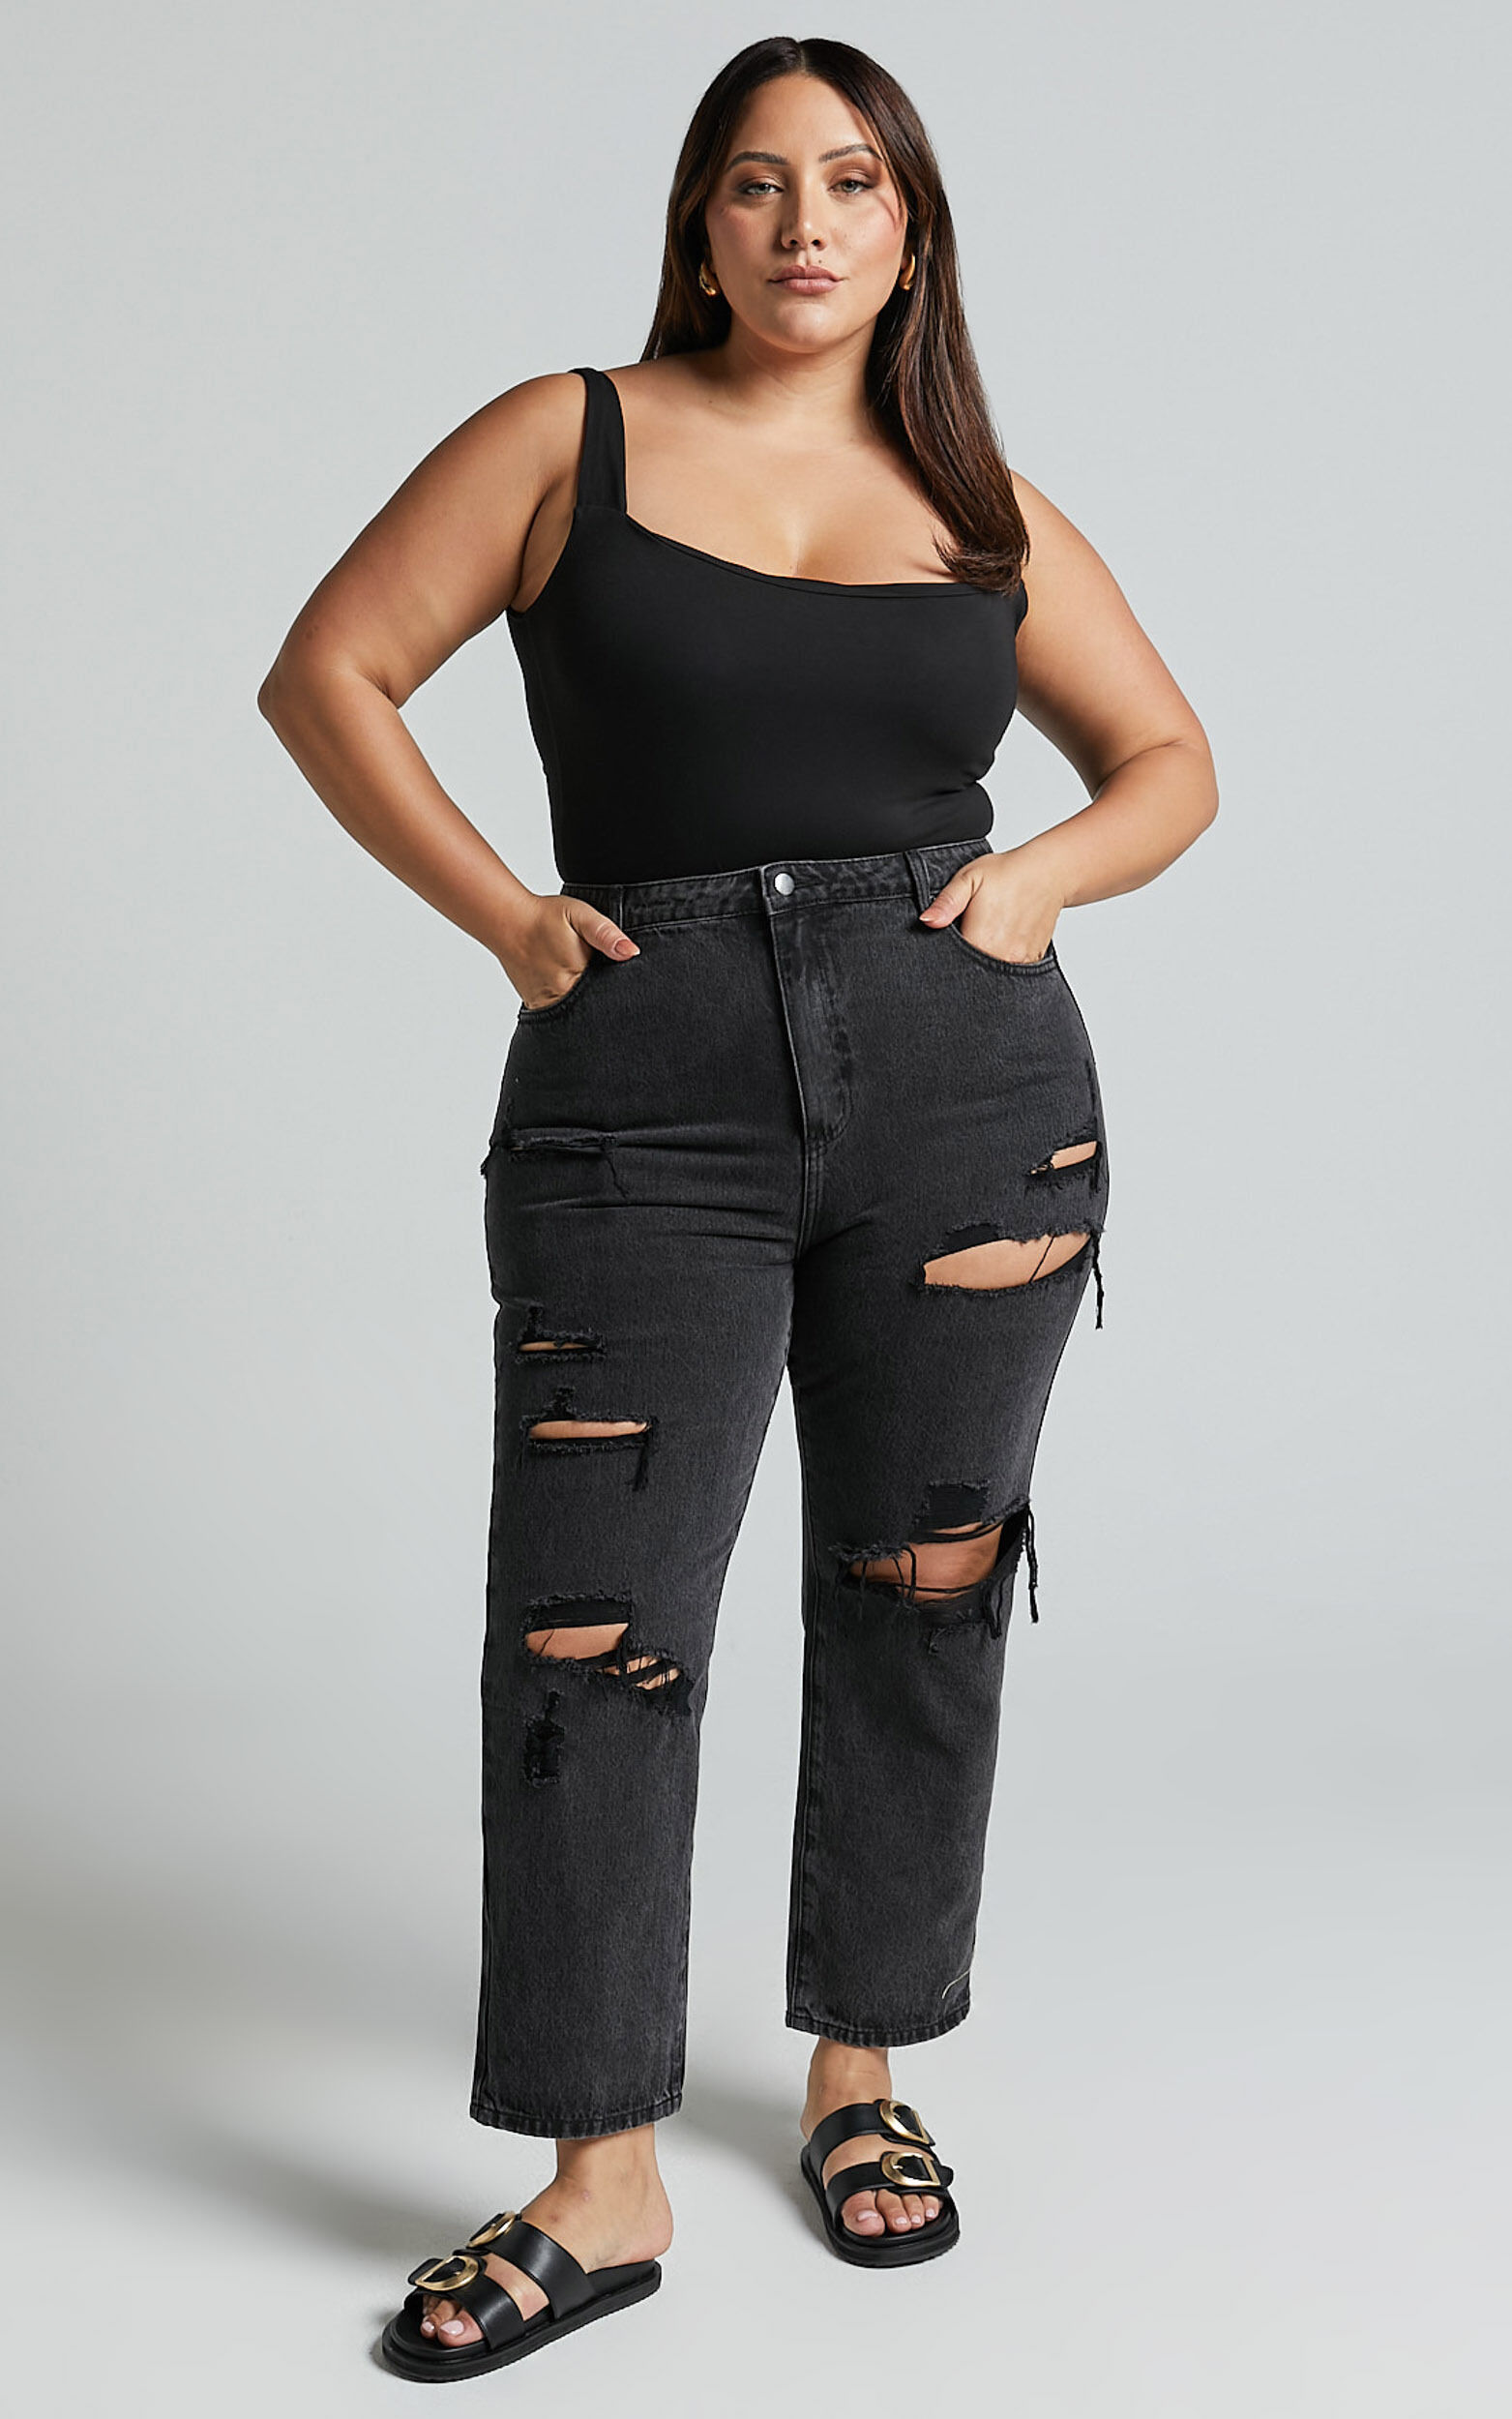 Billie Jeans - High Waisted Cotton Distressed Mom Denim Jeans in